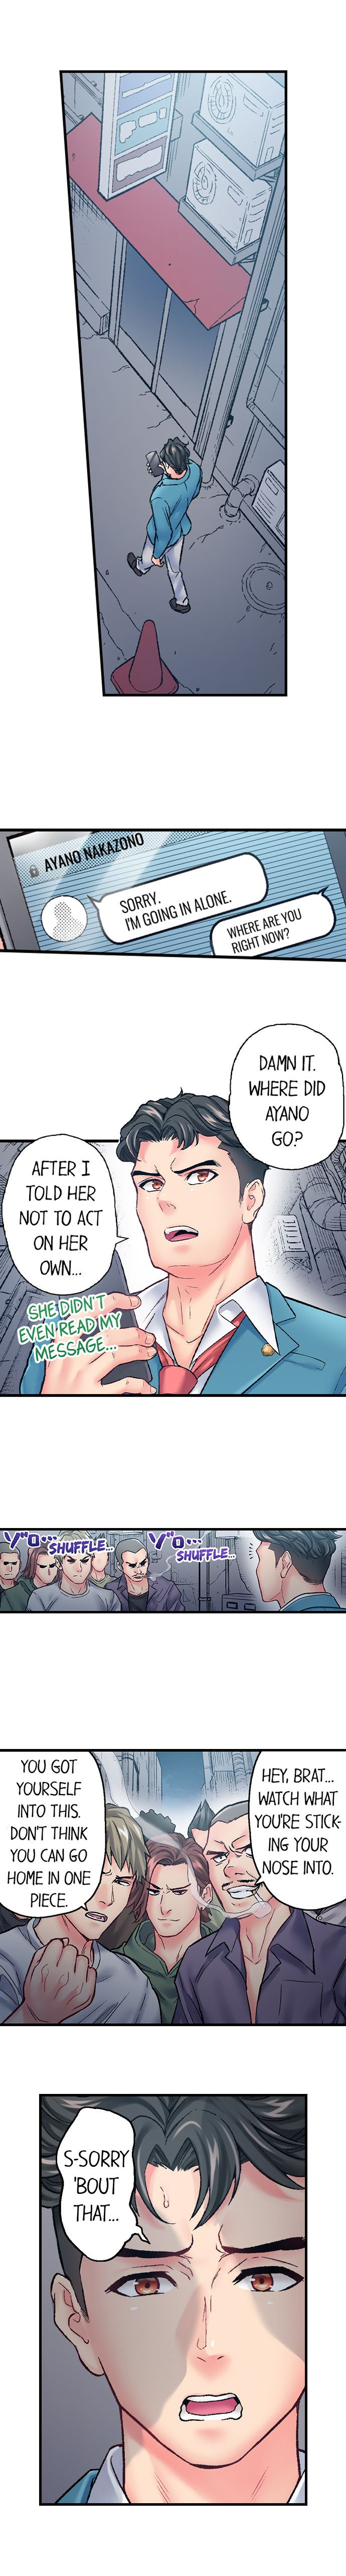 The Porn Star Reincarnated Into a Bullied Boy - Chapter 10 Page 6